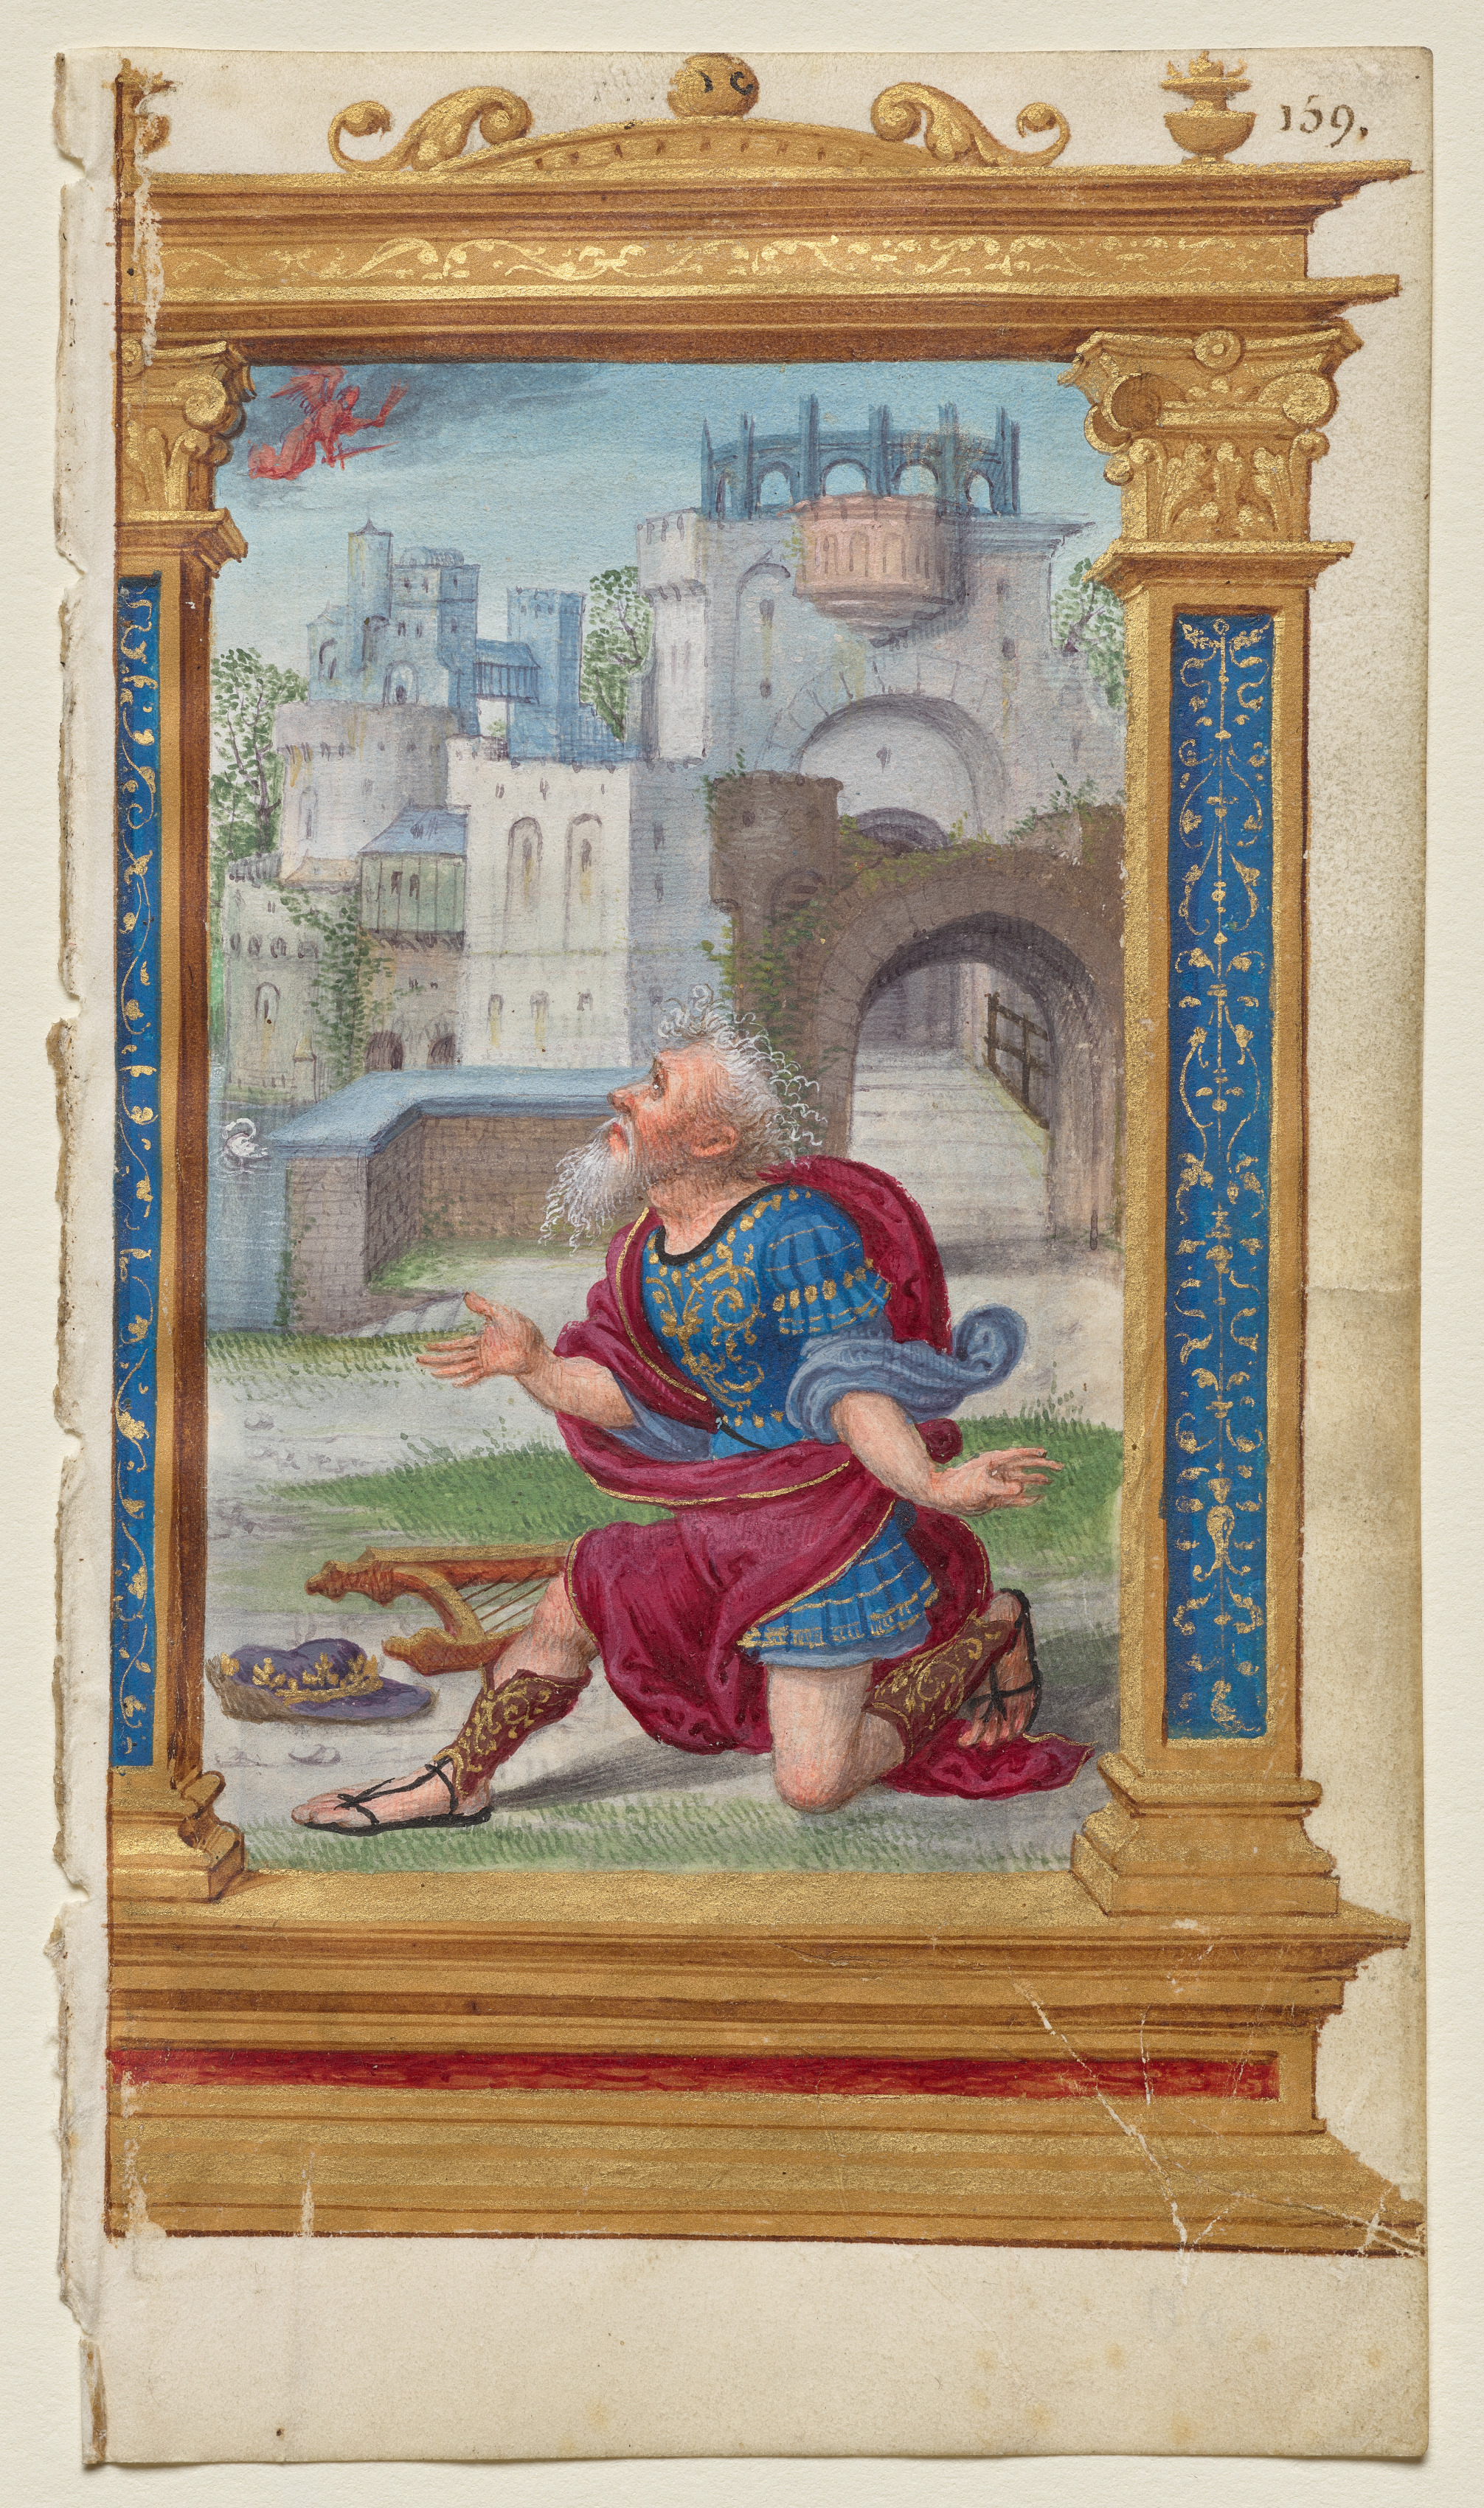 Leaf from a Book of Hours: King David in Prayer (2 of 3 Excised Leaves)